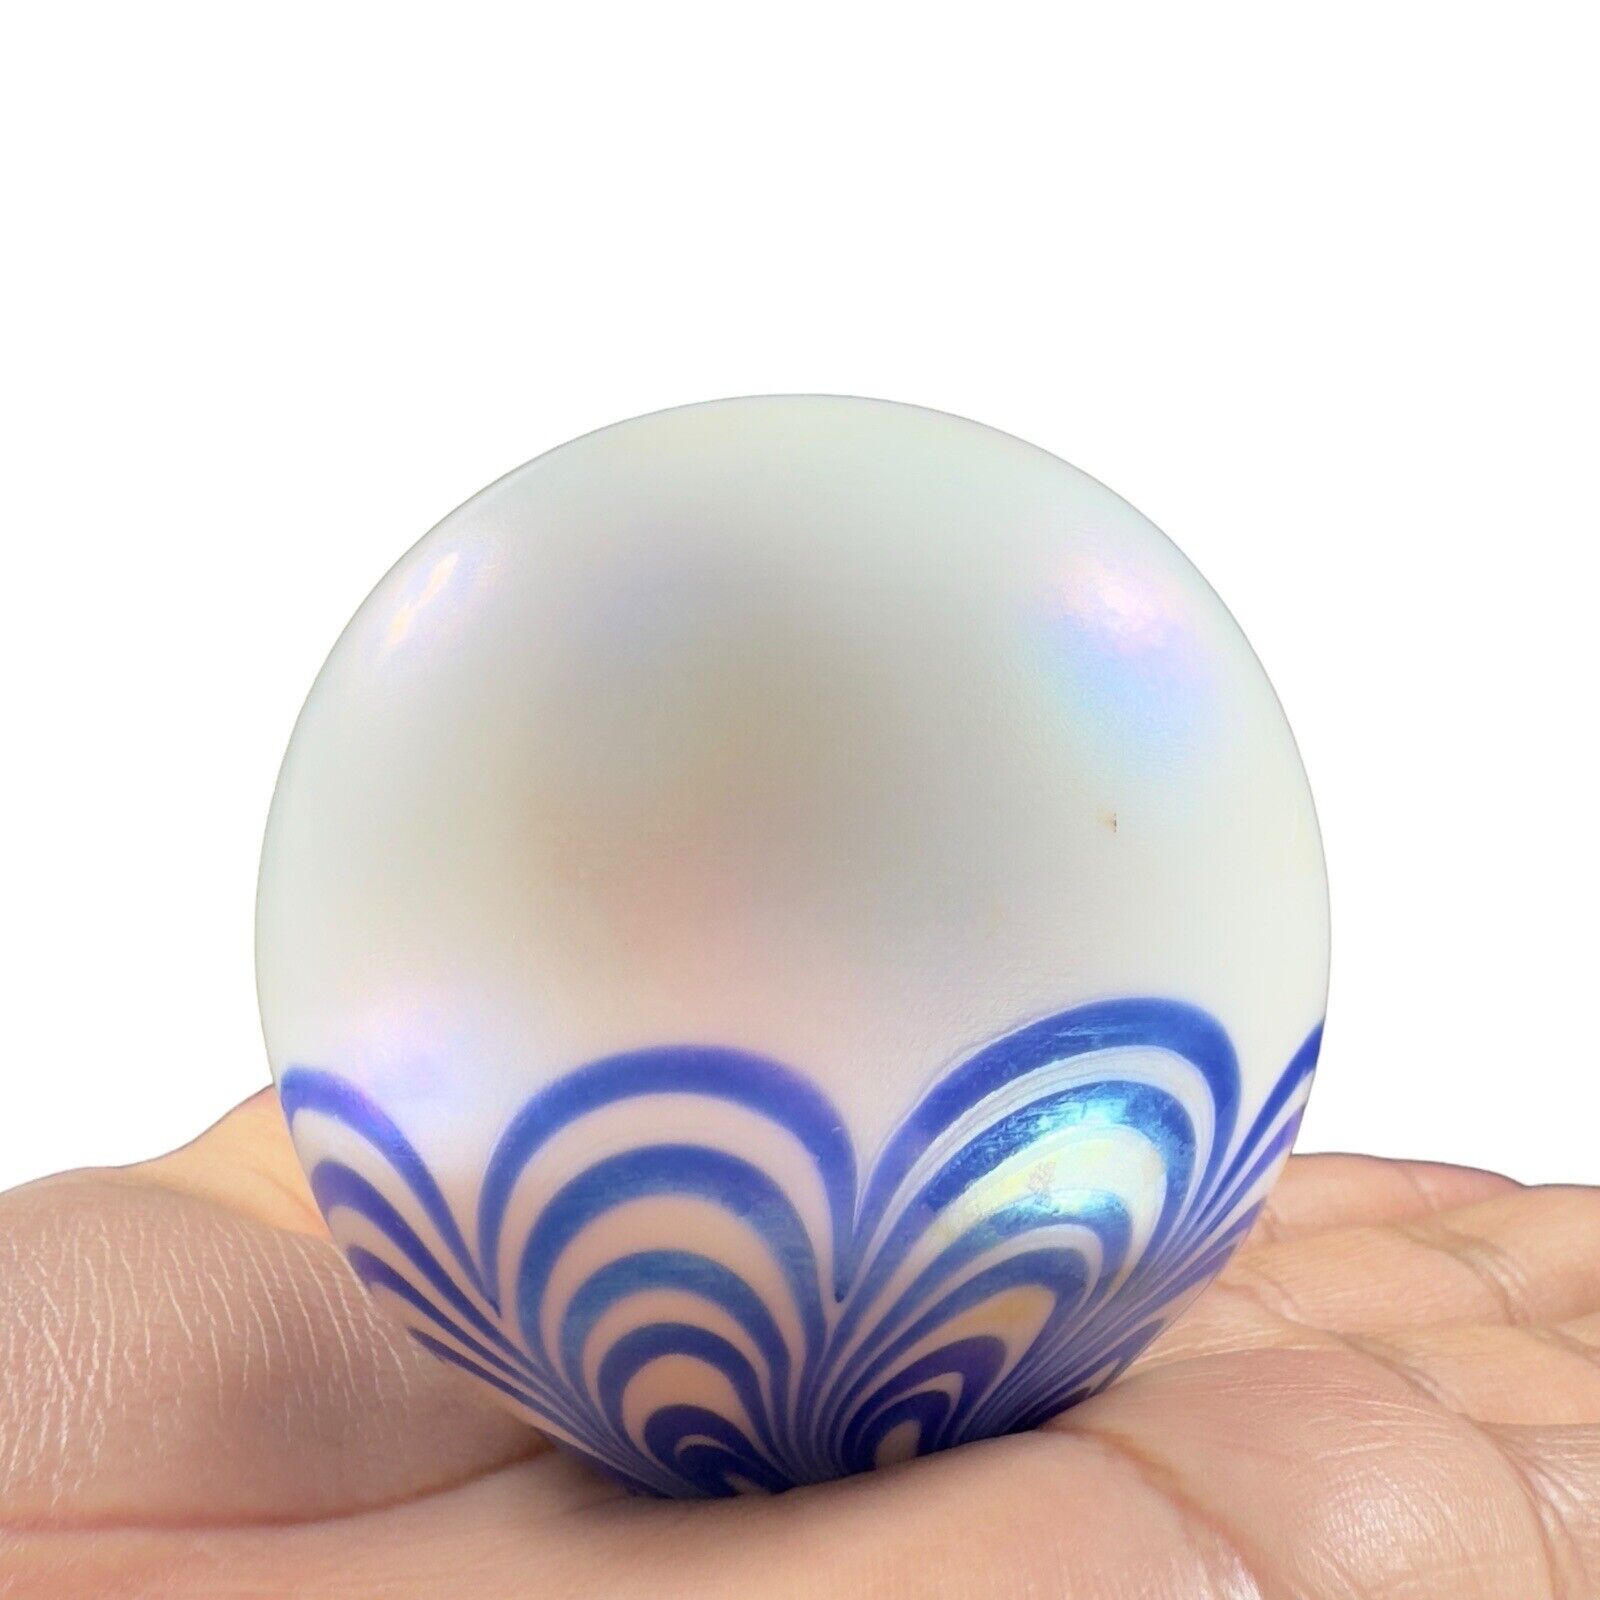 Vintage Art Glass Paperweight Round Orb White Iridescent With Blue Swirls Lines